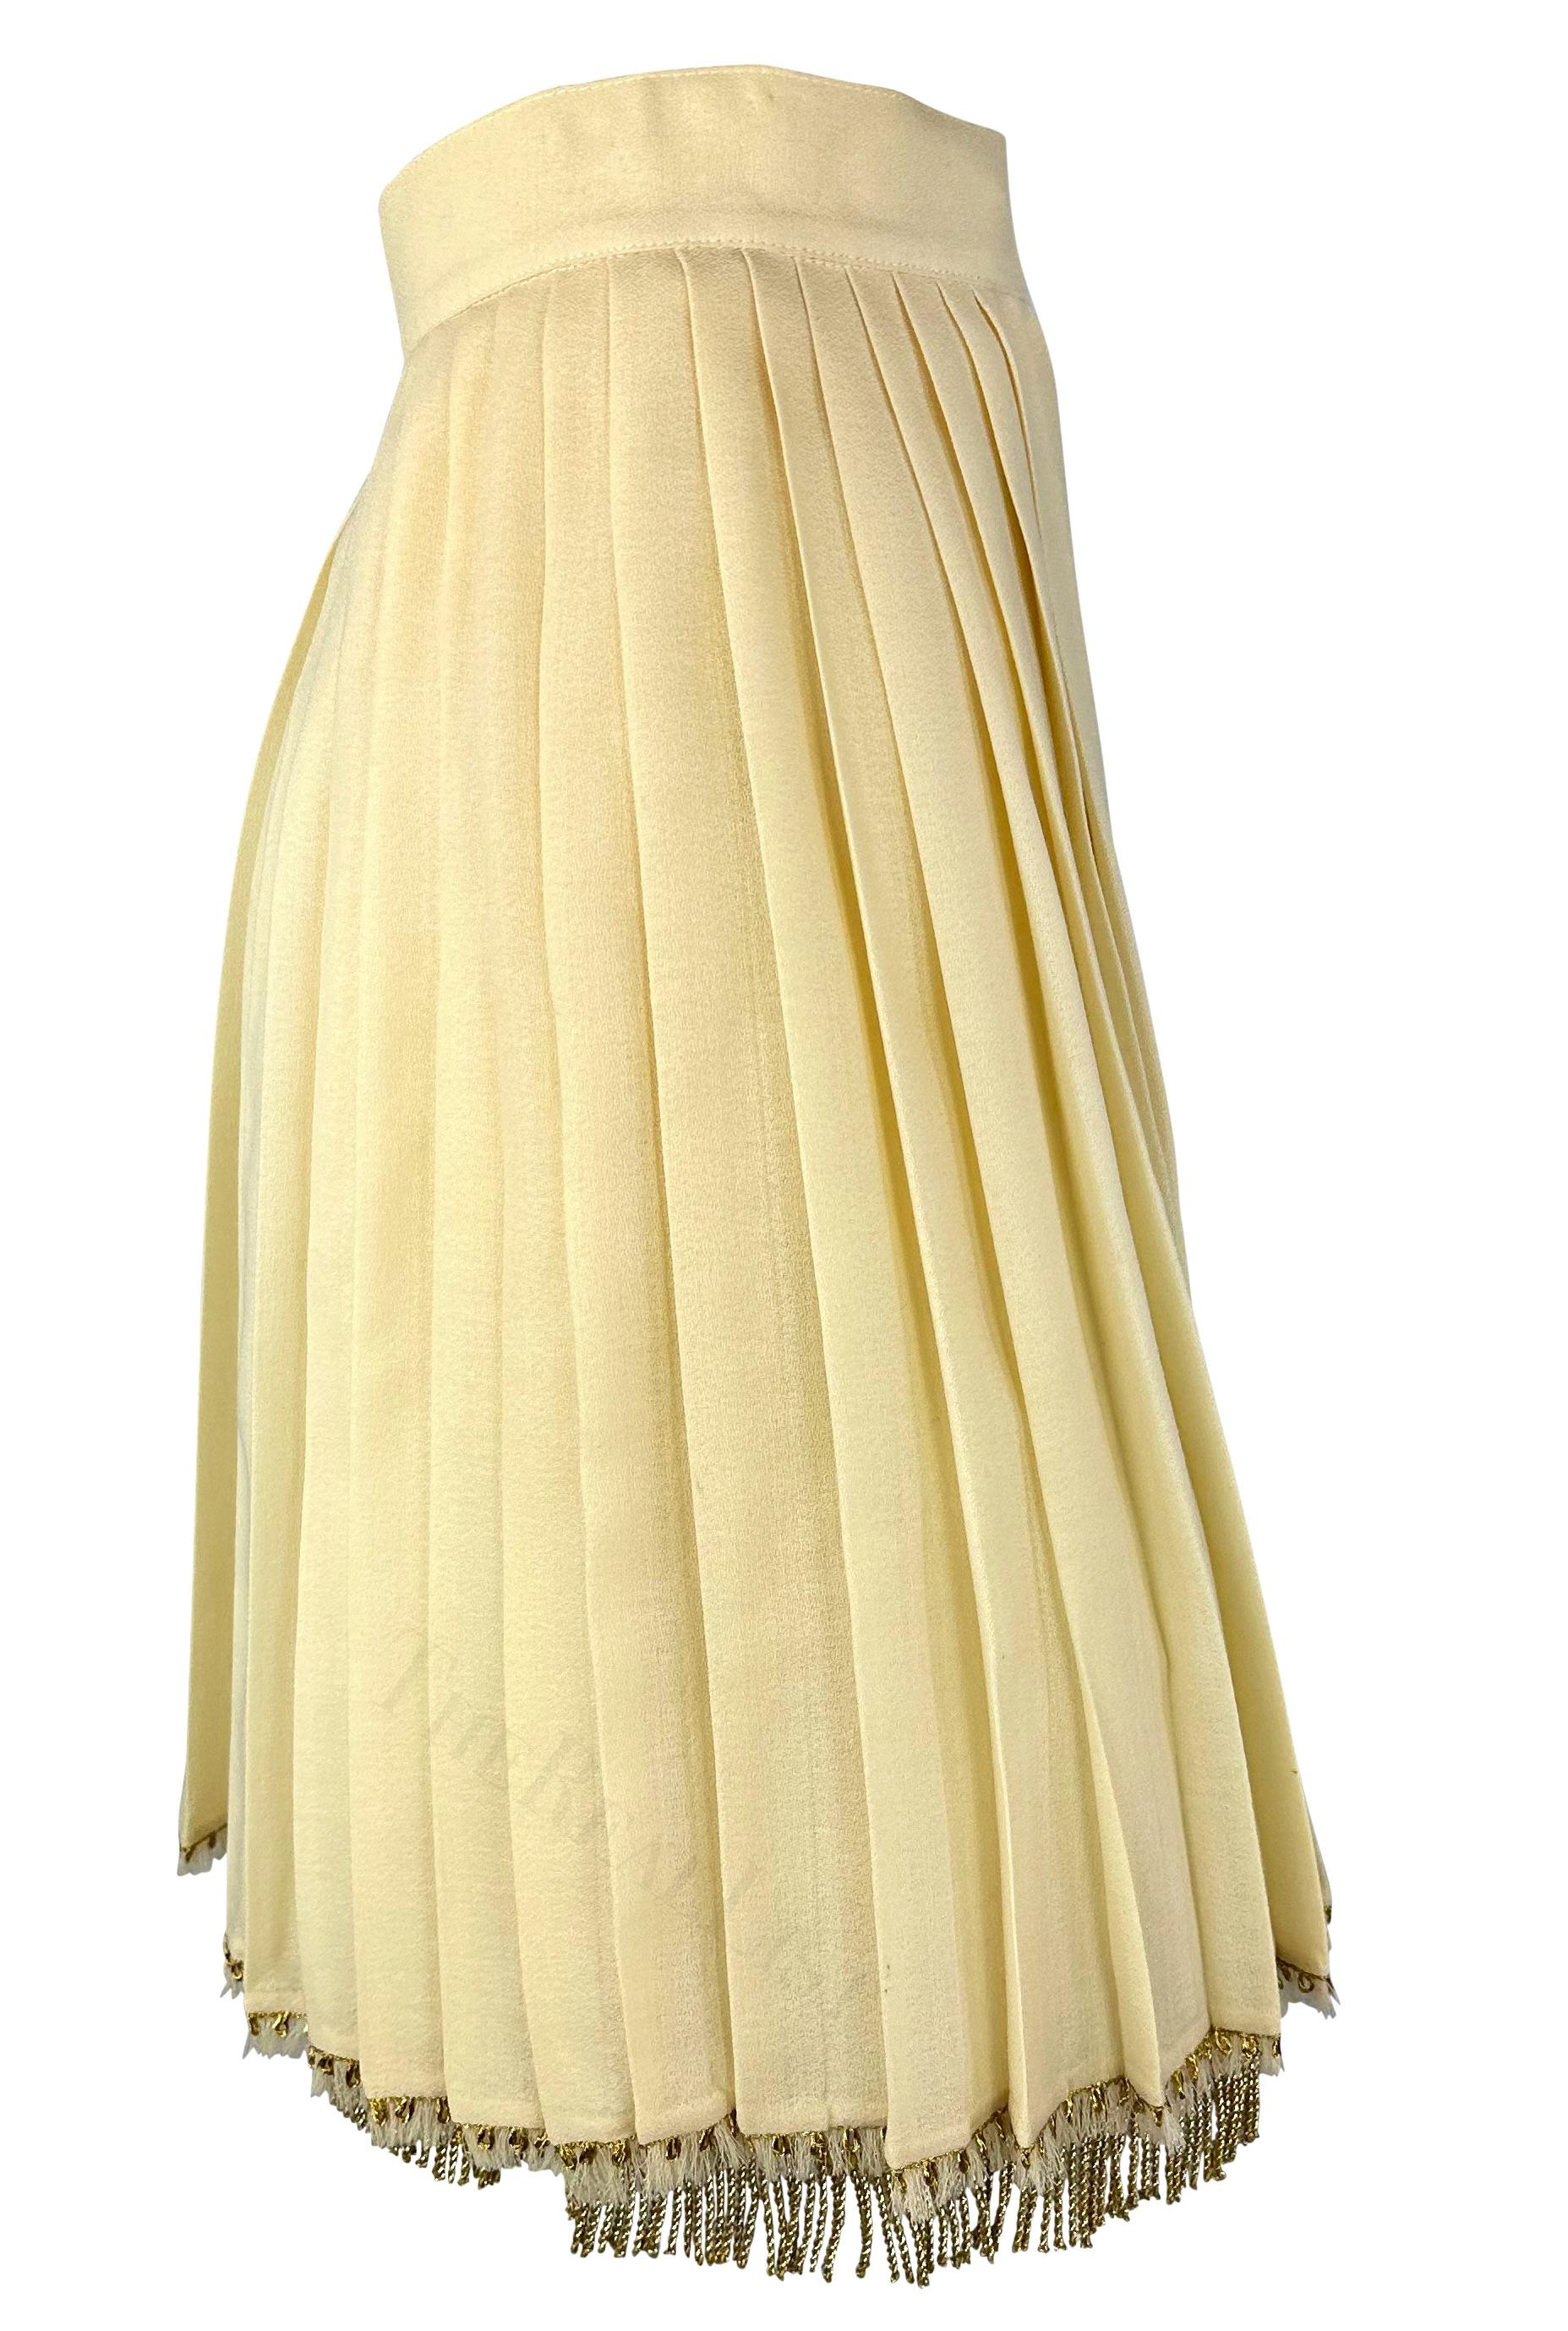 S/S 1992 Gianni Versace Couture Off-White Pleat Wrap Fringe Skirt Crinoline Set For Sale 2